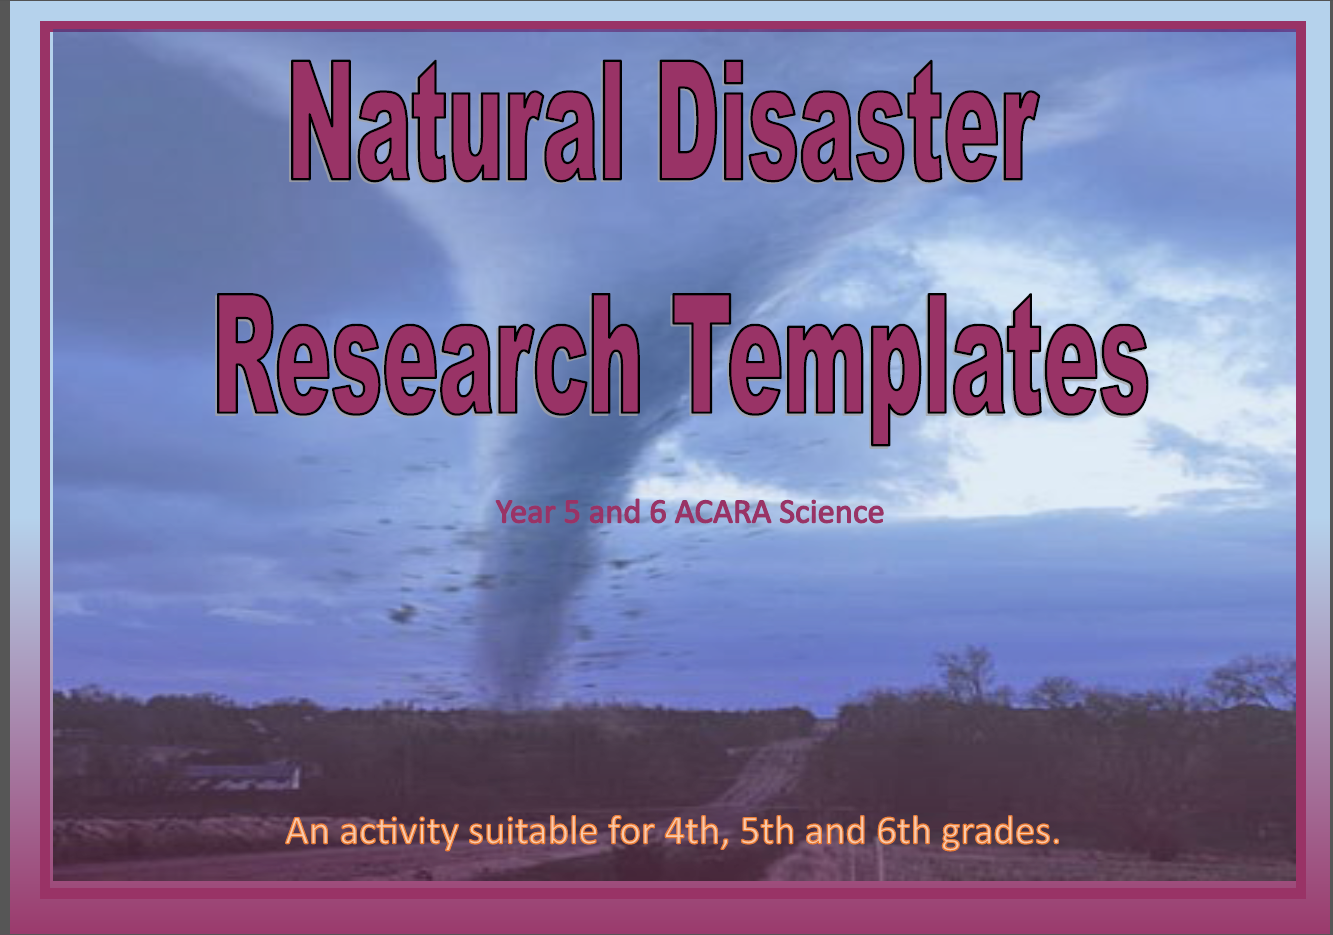 Natural Disaster Research Templates